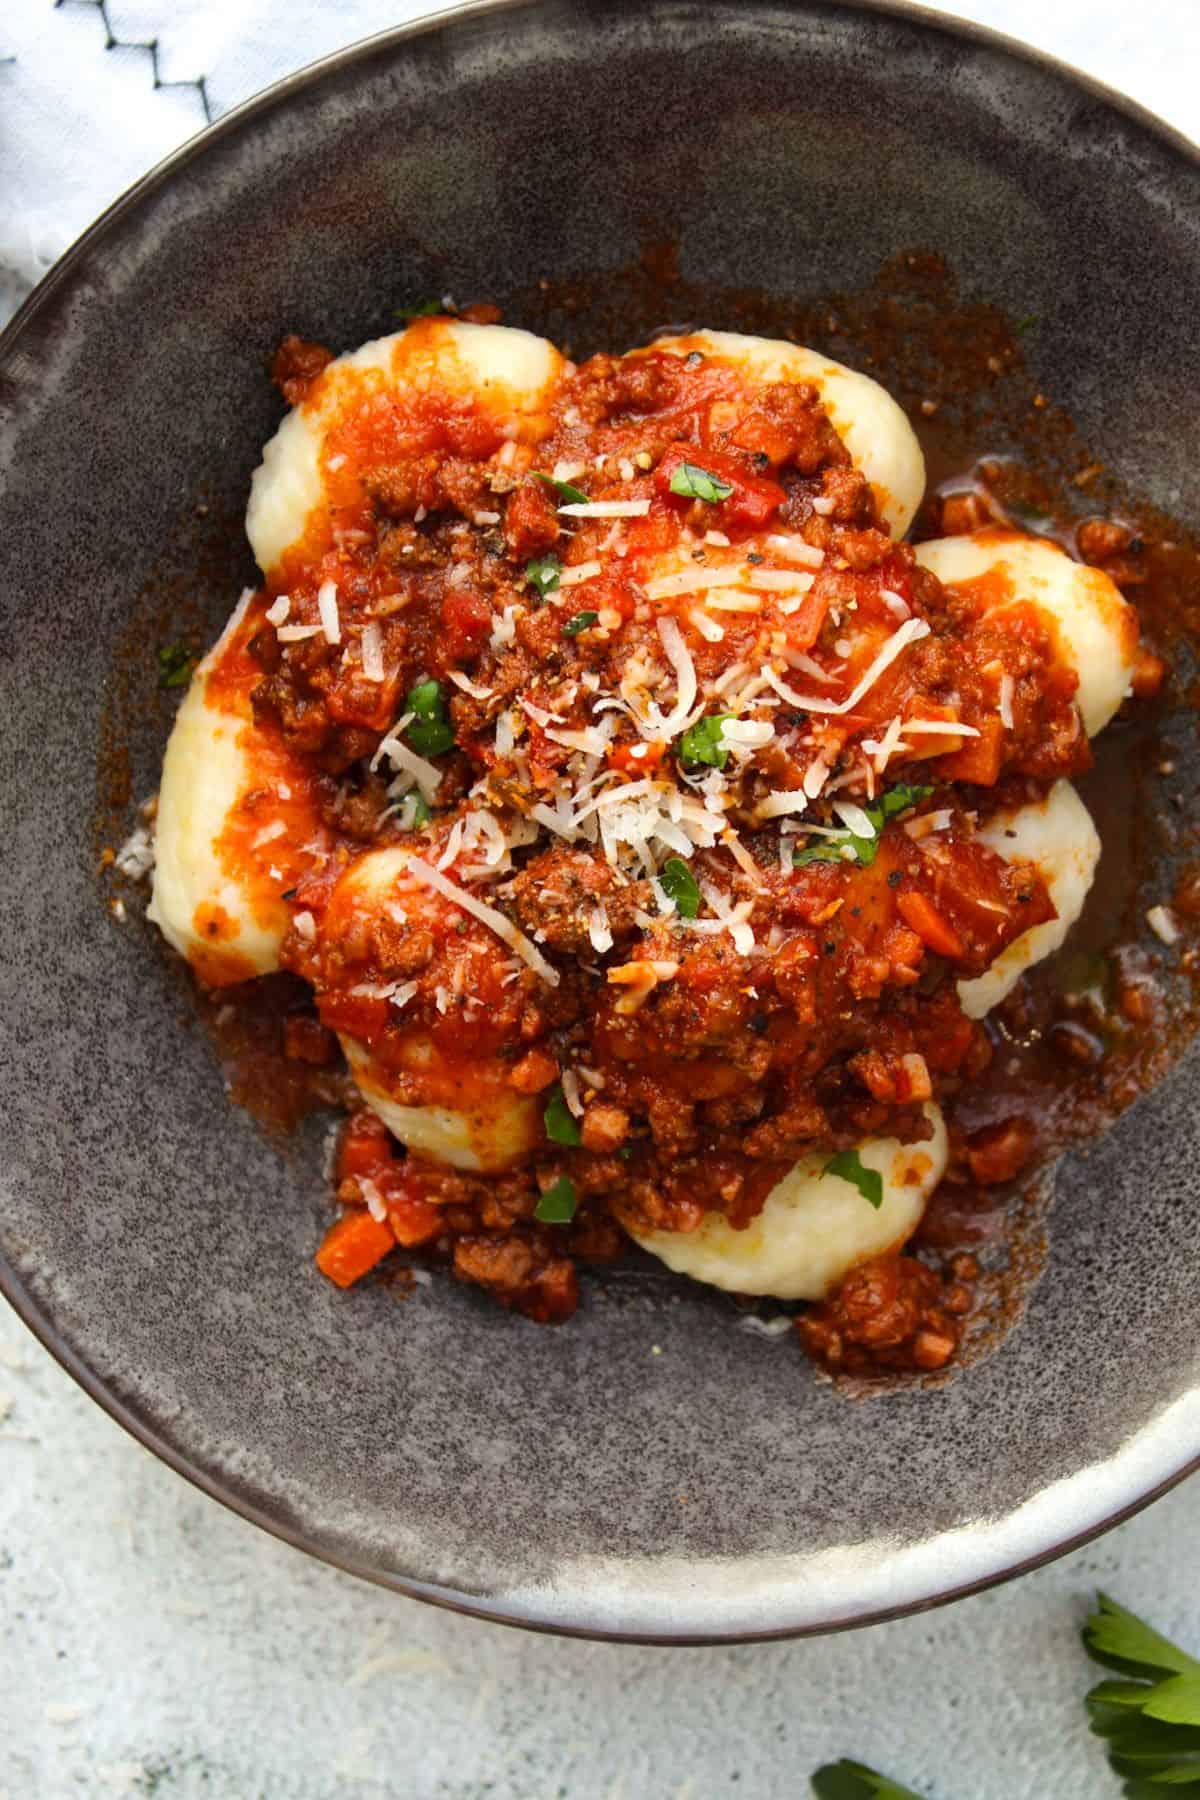 Homemade gnocchi covered in red bolognese sauce, Parmesan, and parsley.